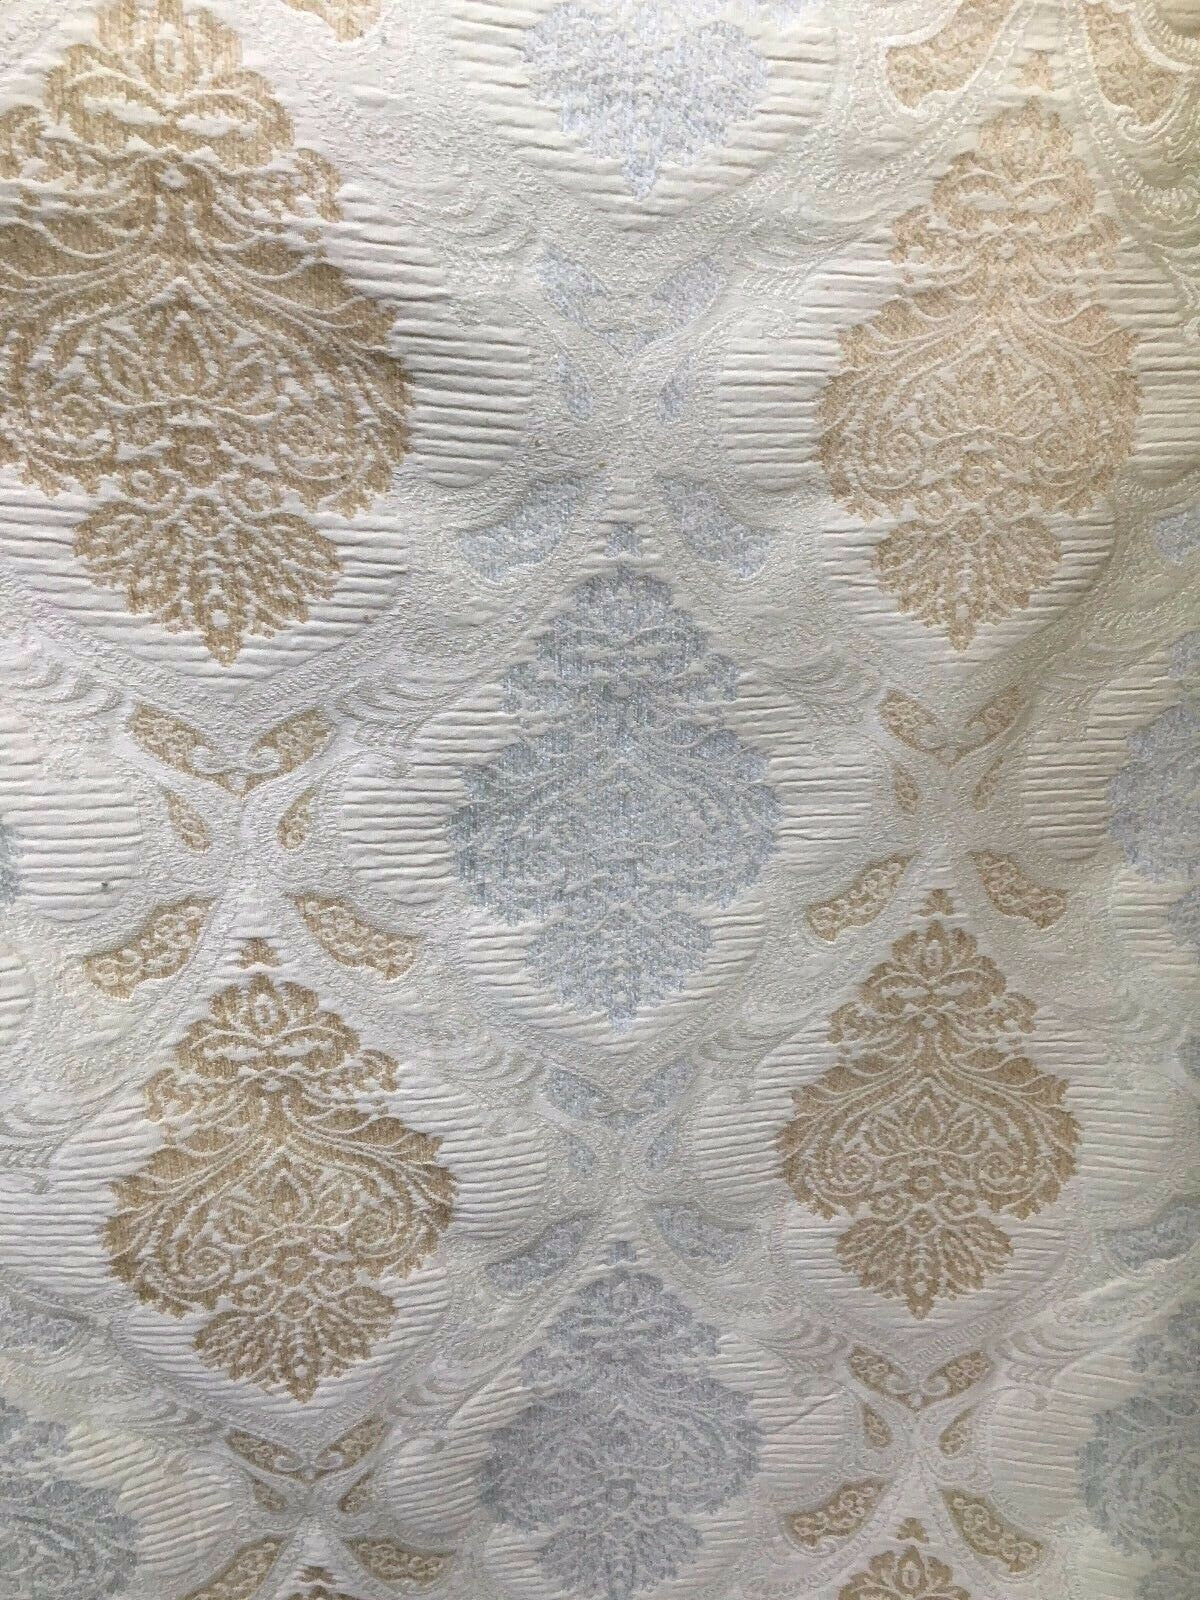 IVORY MULTICOLOR Damask Chenille Upholstery Brocade Fabric (54 in.) Sold By The Yard